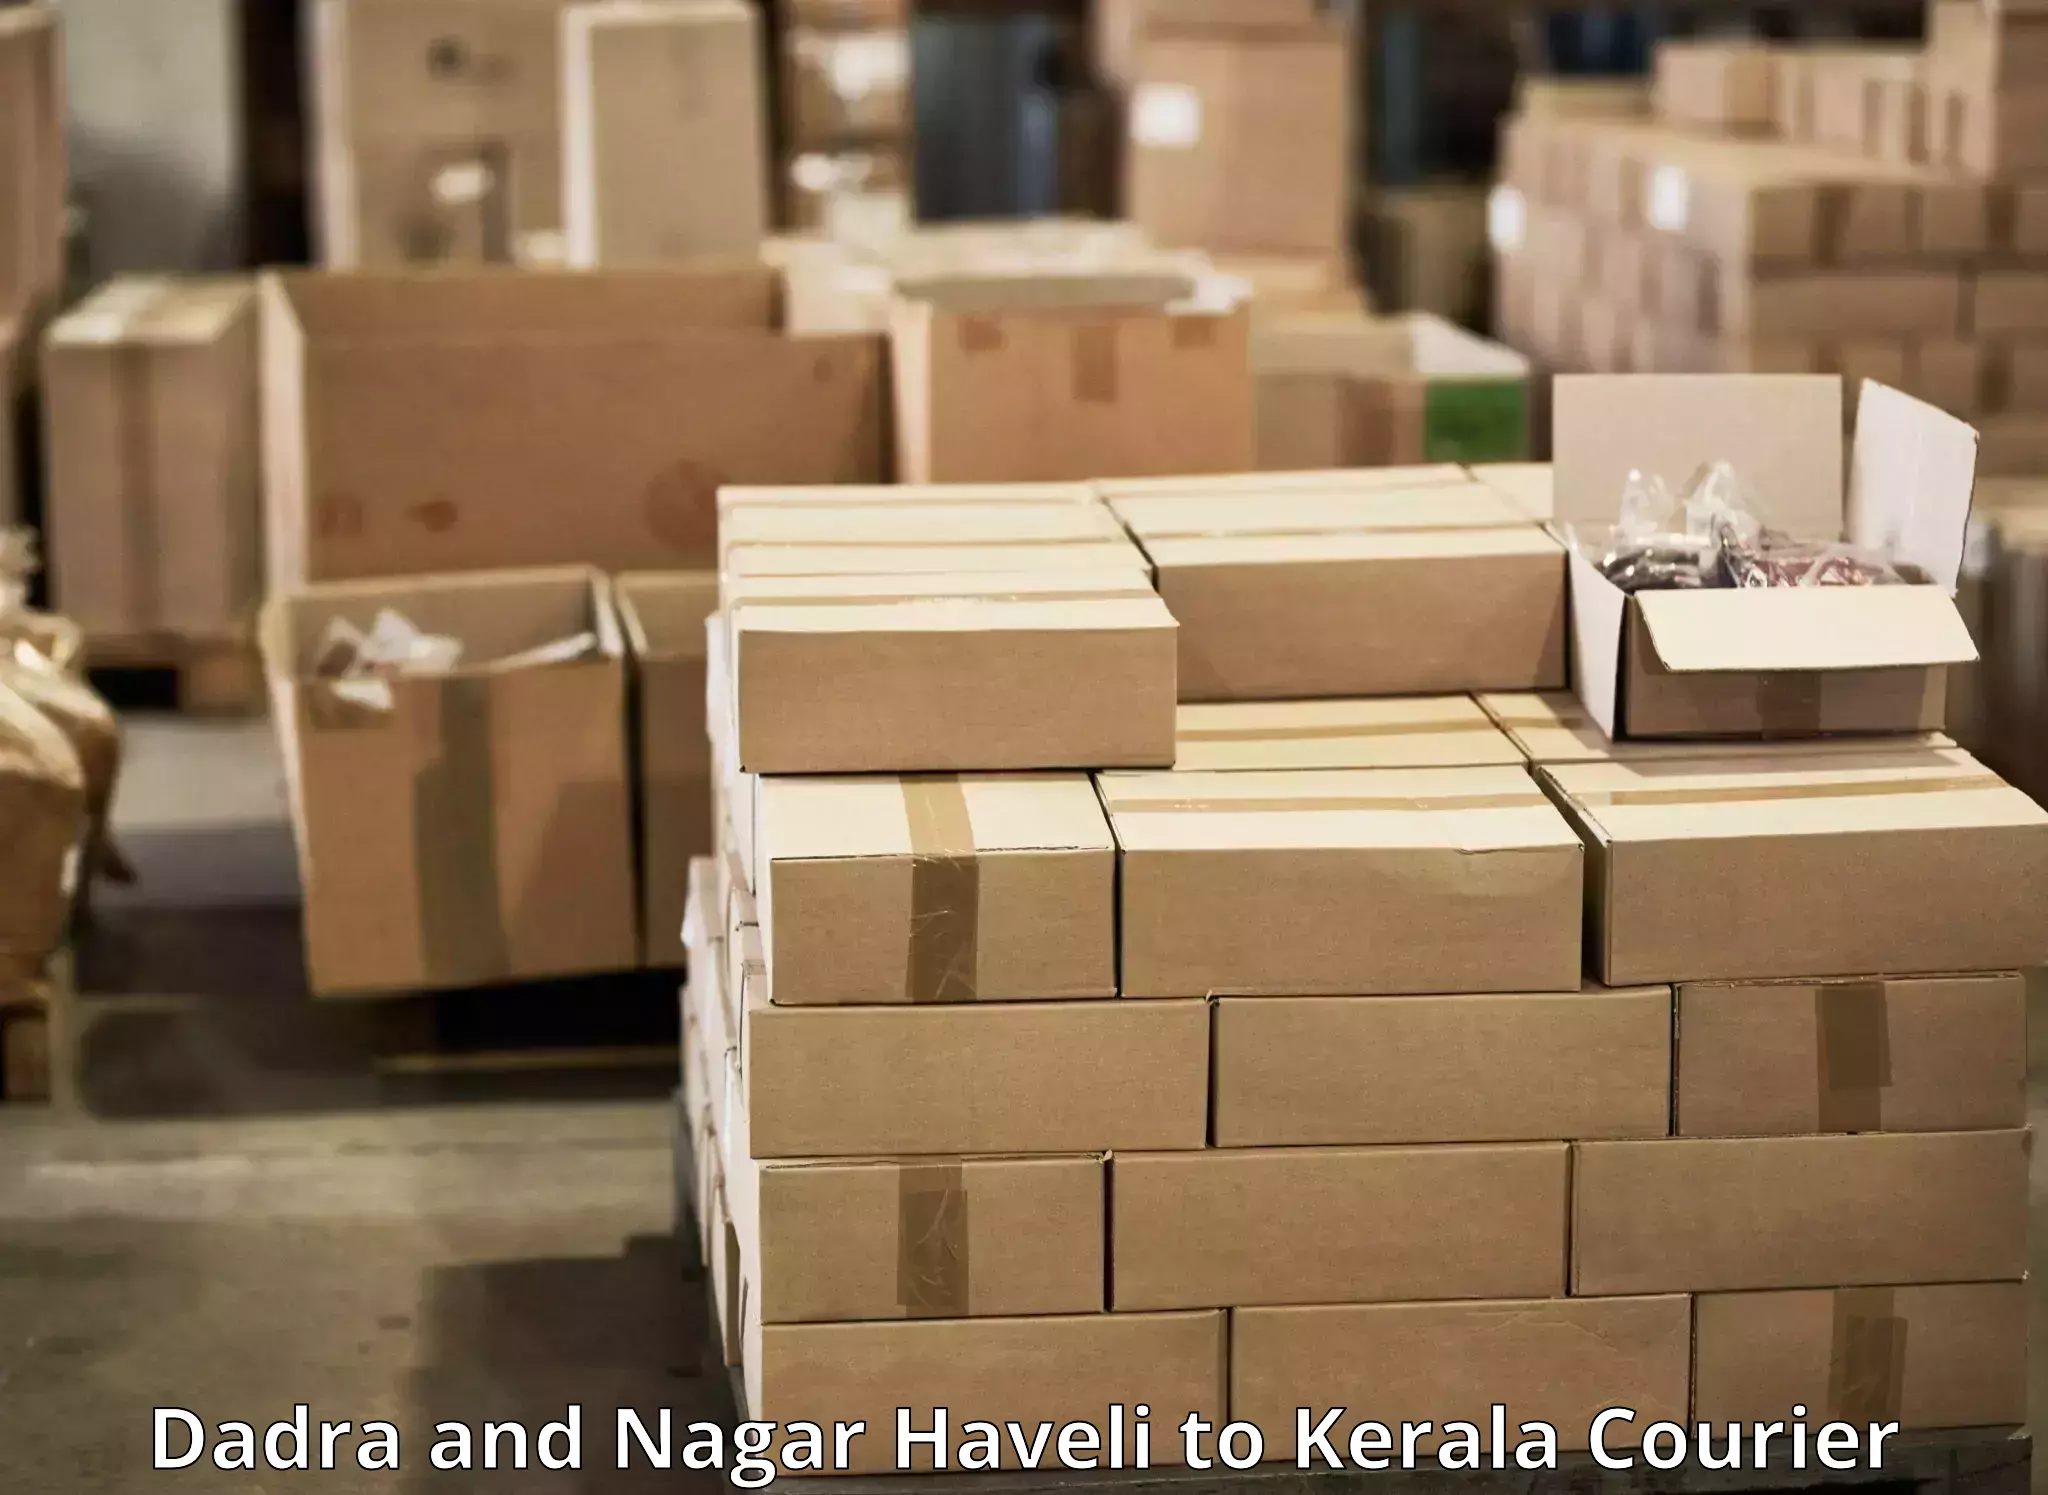 End-to-end delivery Dadra and Nagar Haveli to Thiruvananthapuram